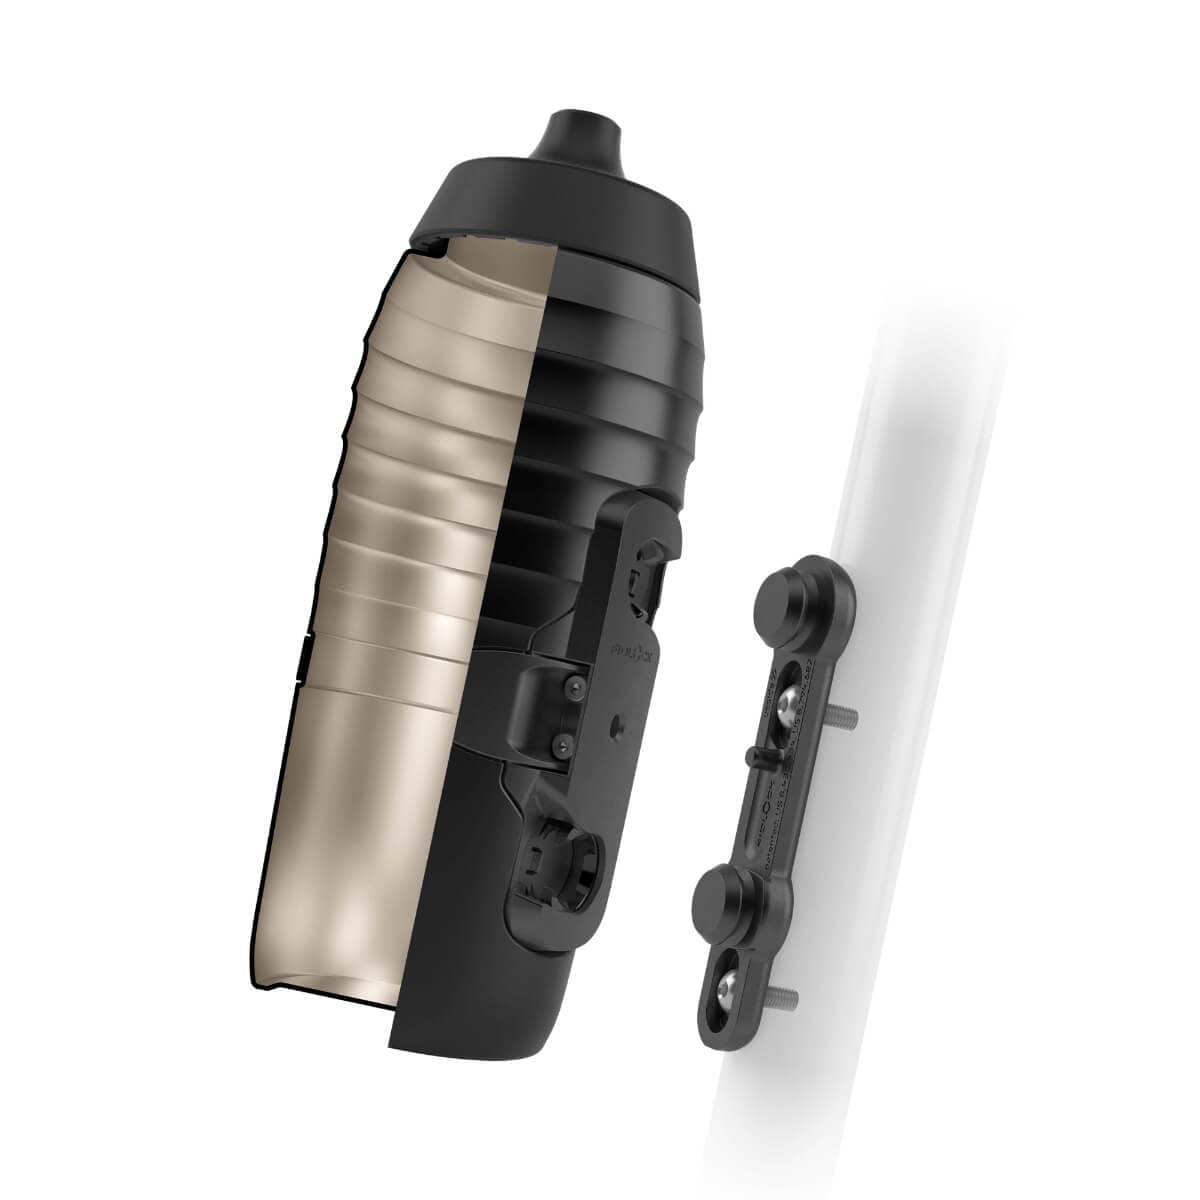 Cut of the black bicycle bottle TWIST x KEEGO 0.6L with visible titanium interior and the magnetic FIDLOCK bottle cage